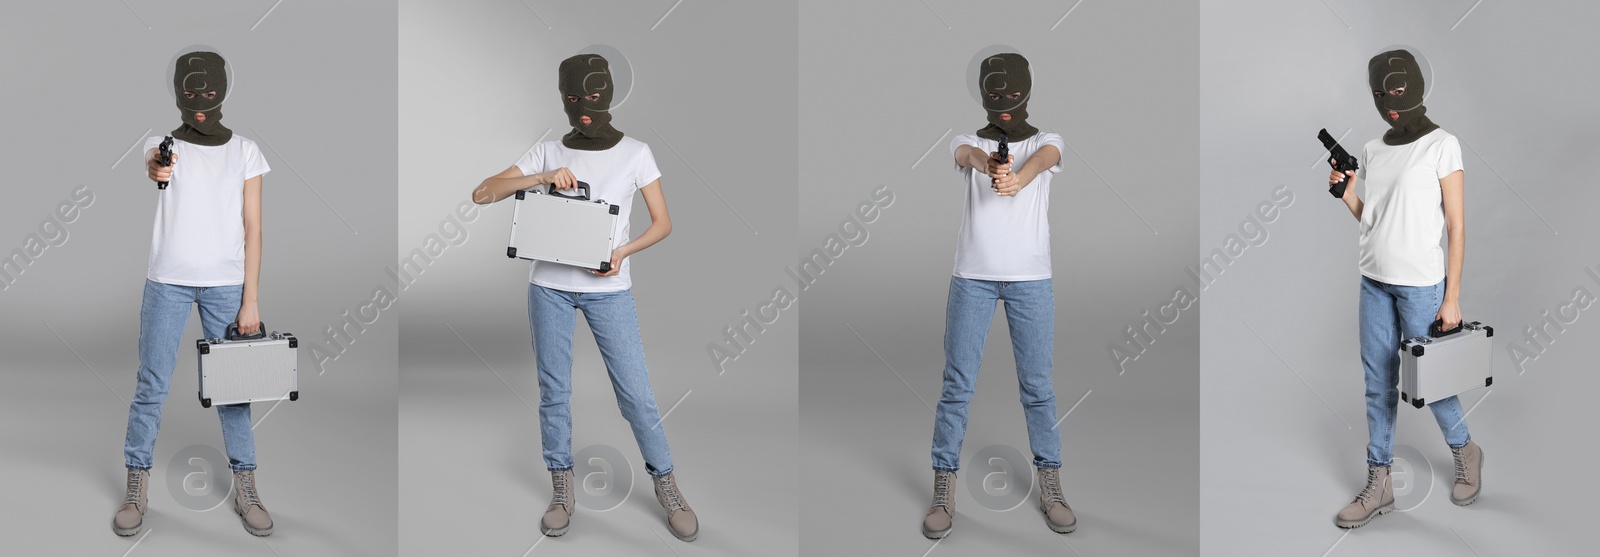 Image of Collage with photos of woman in balaclava on grey background